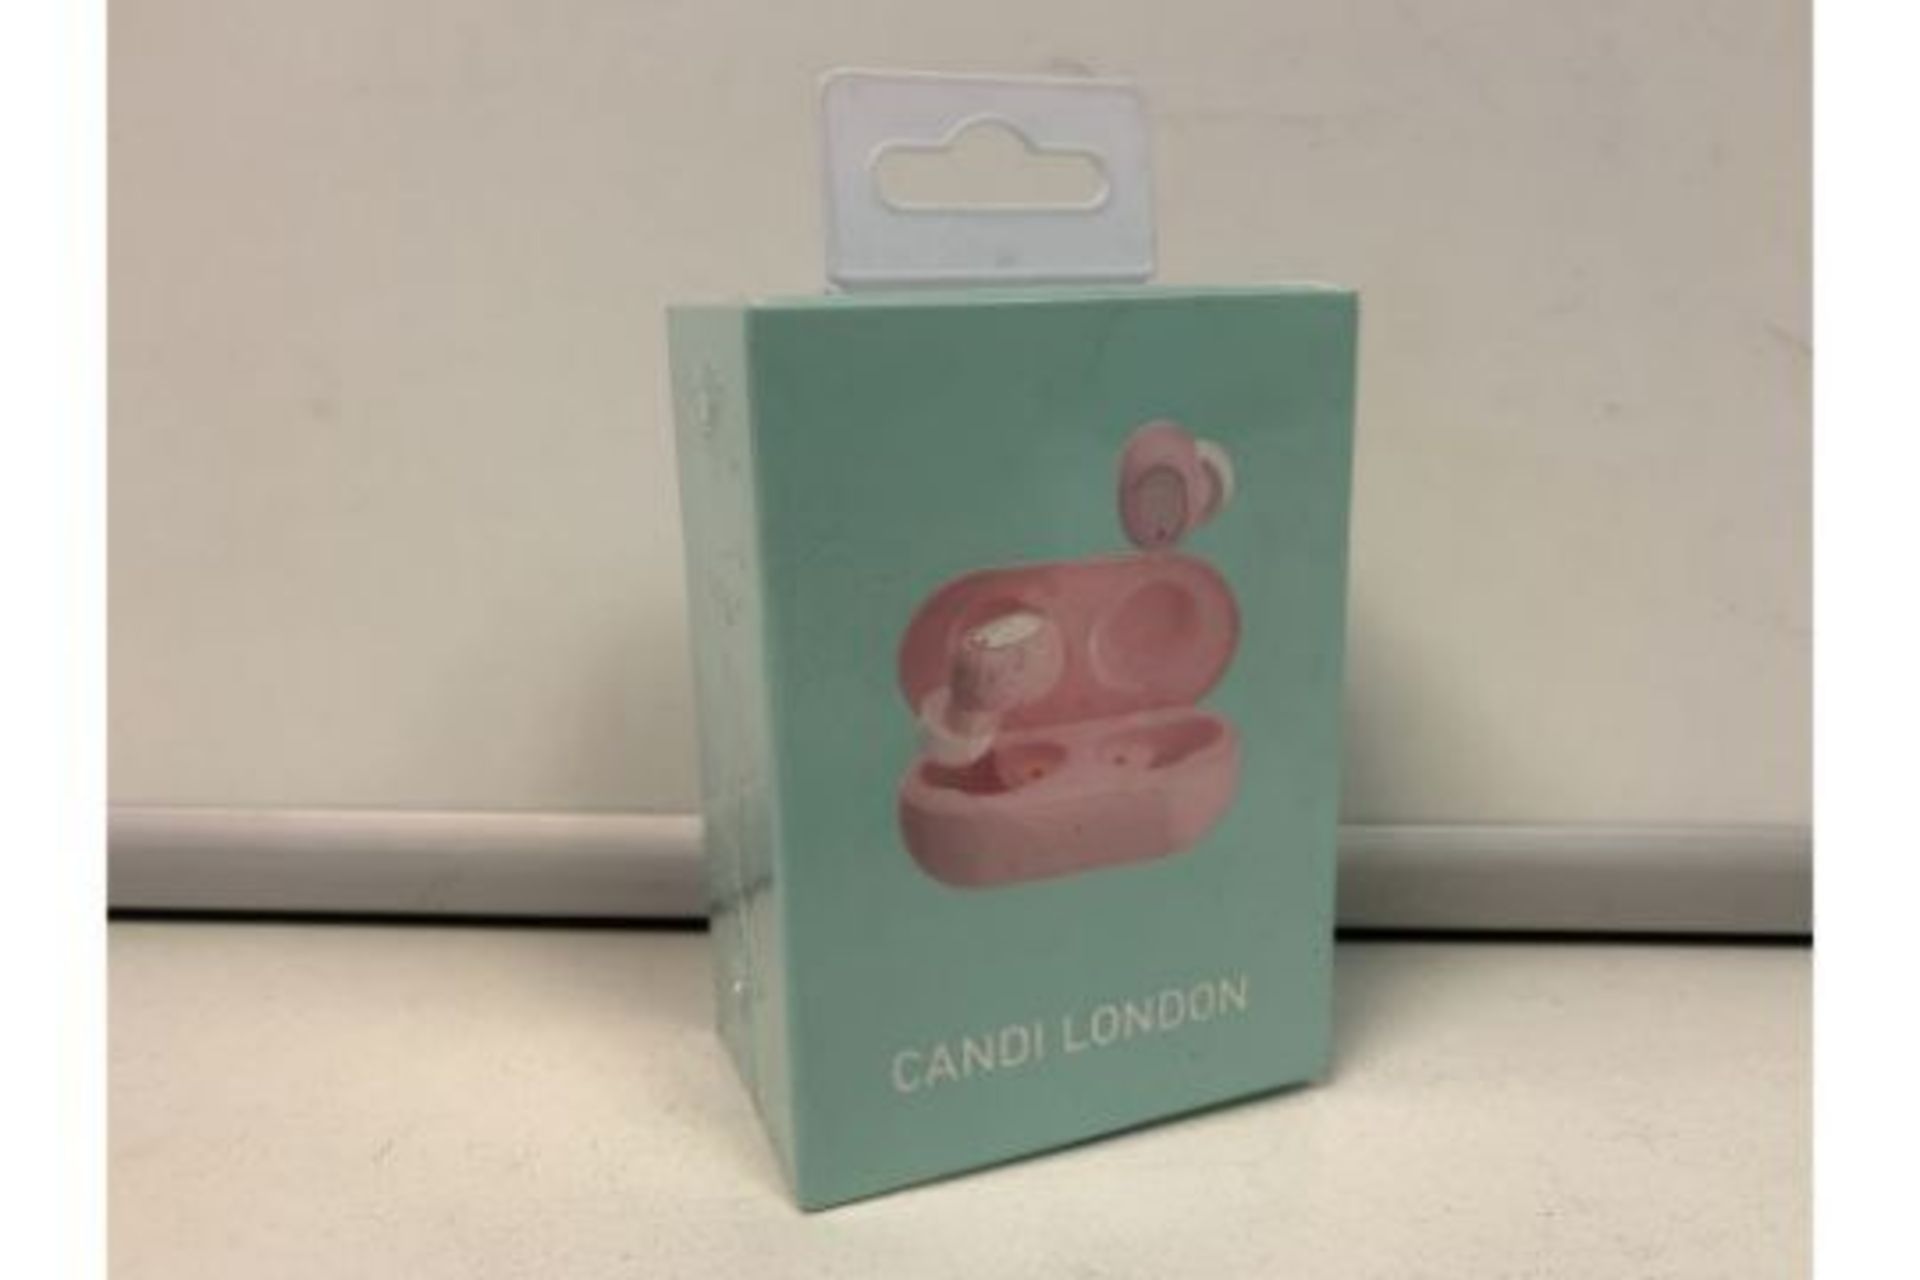 5 X BRAND NEW CANDI LONDON TW15 EAR PODS RRP £120 EACH OFF